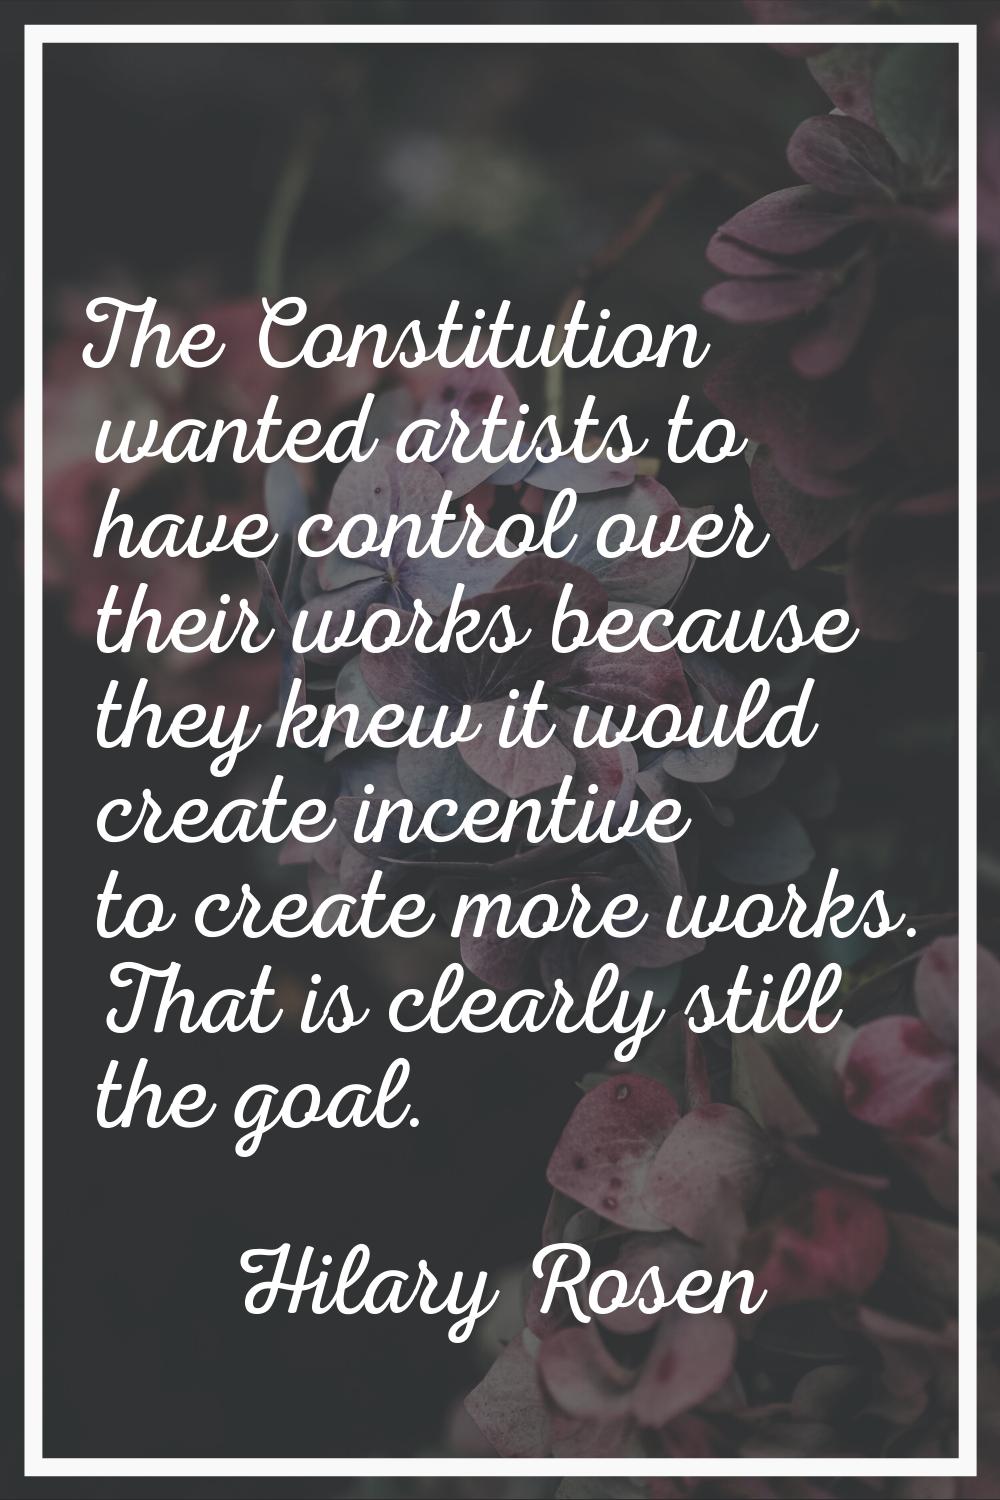 The Constitution wanted artists to have control over their works because they knew it would create 